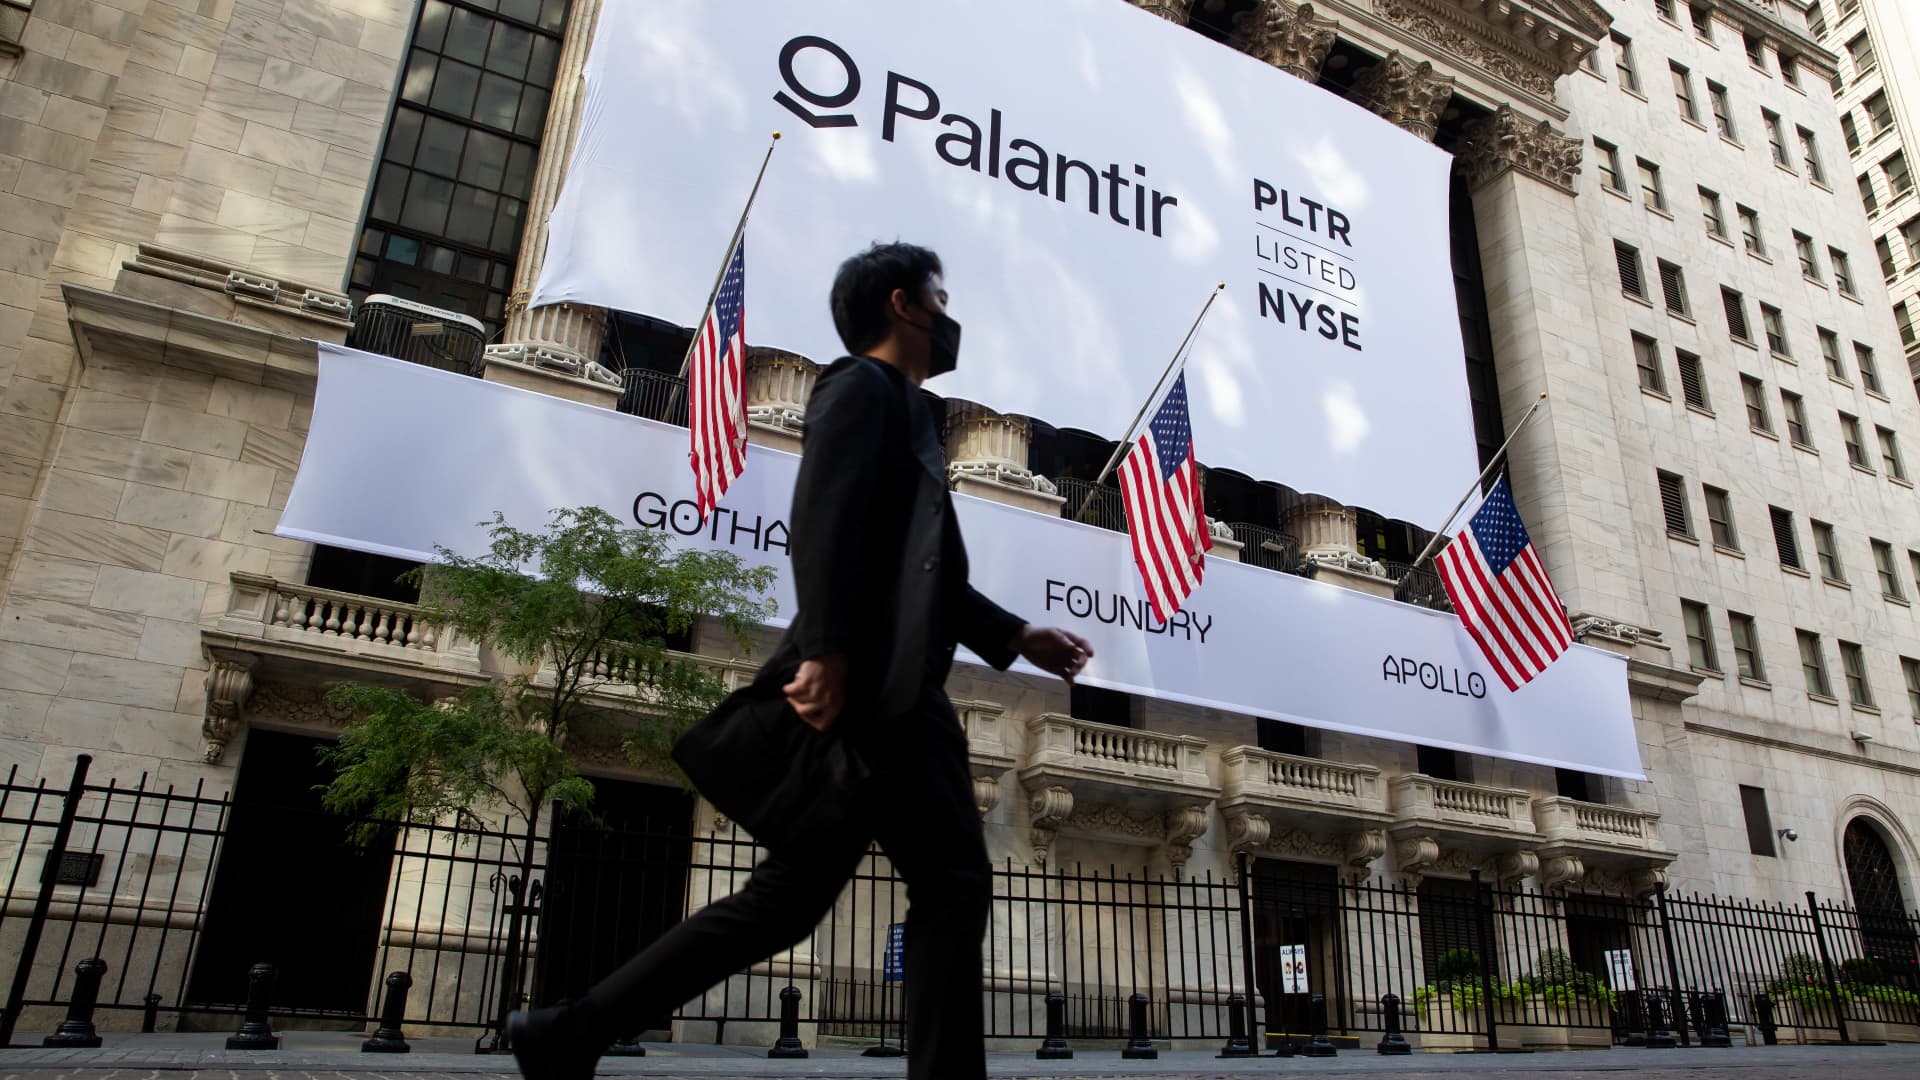 Palantir is a buy as demand for AI platforms grows, Bank of America says